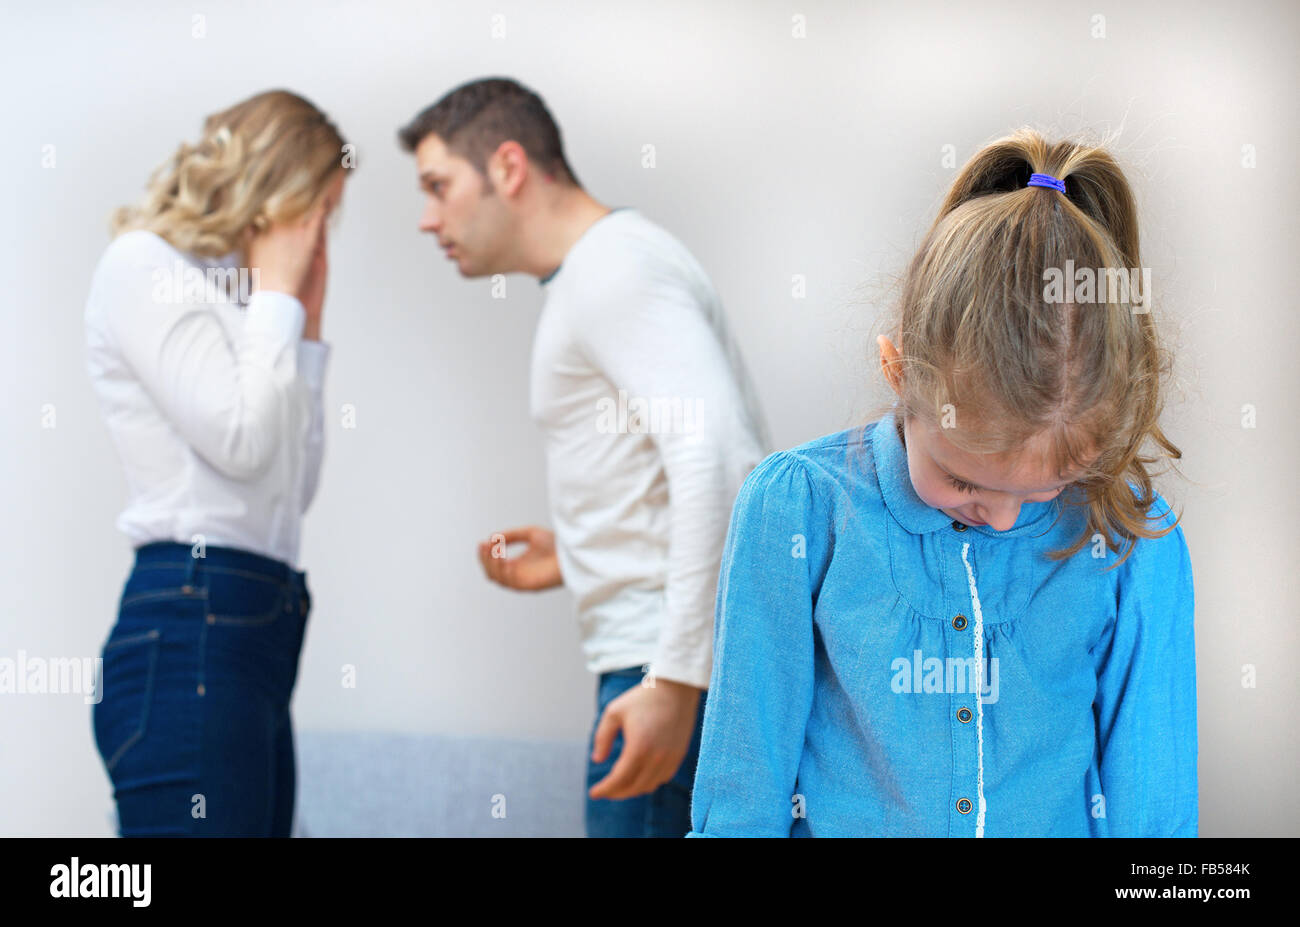 Parents quarreling at home, child in shock. Stock Photo